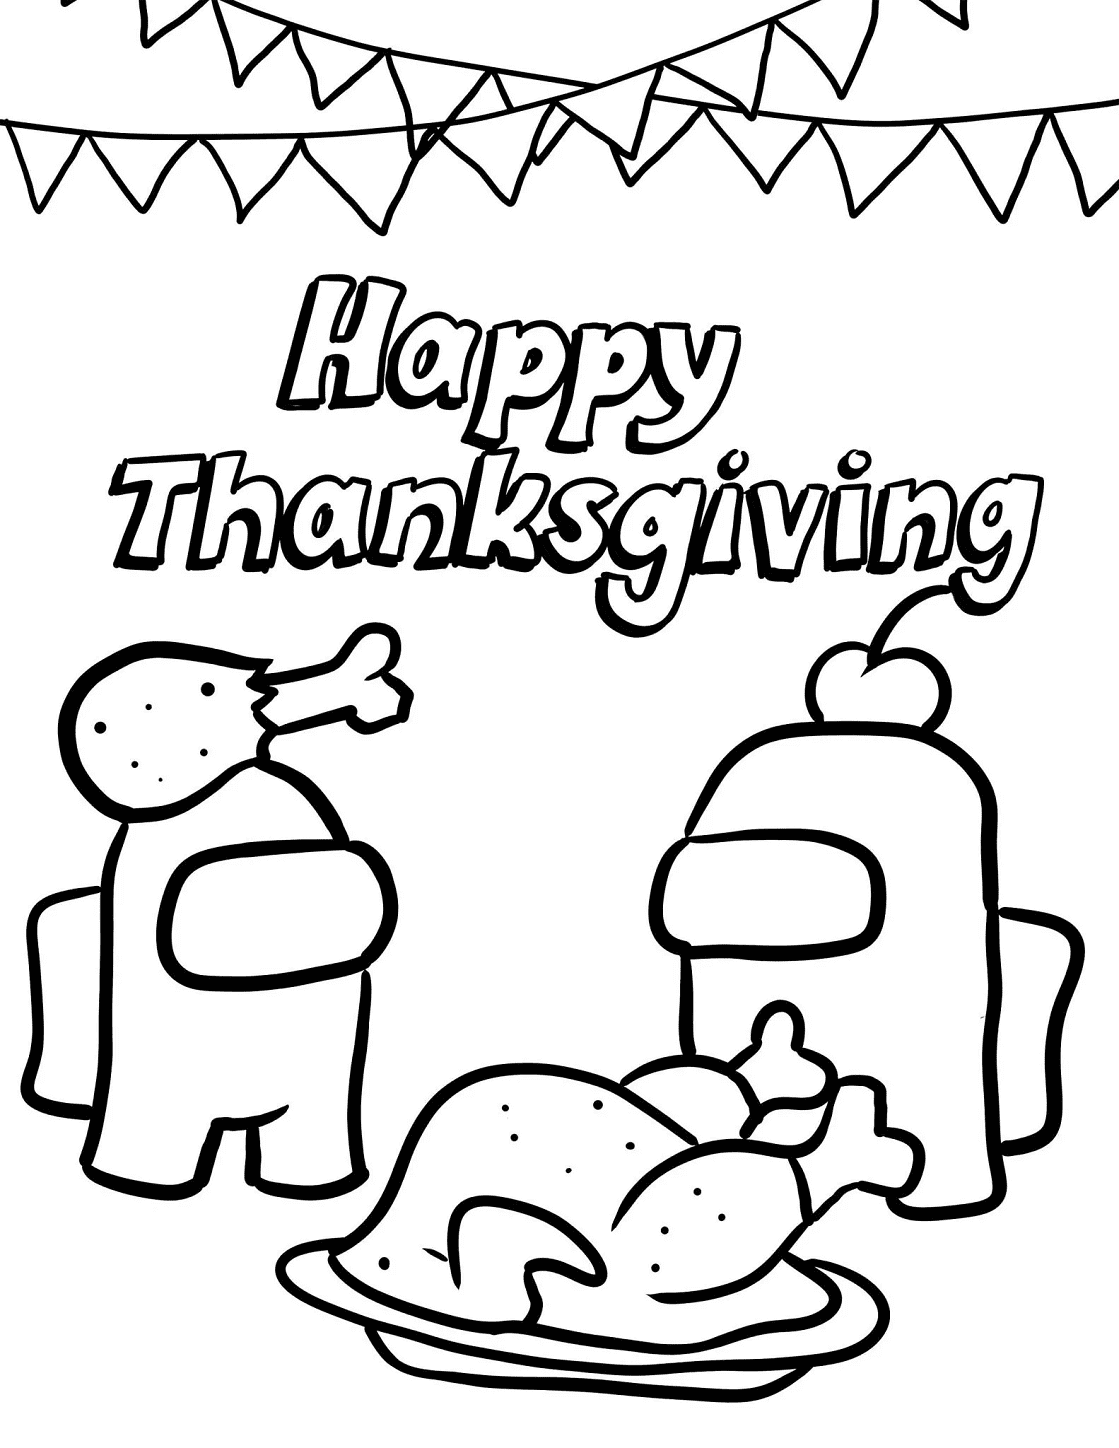 Thanksgiving Among Us Coloring Page